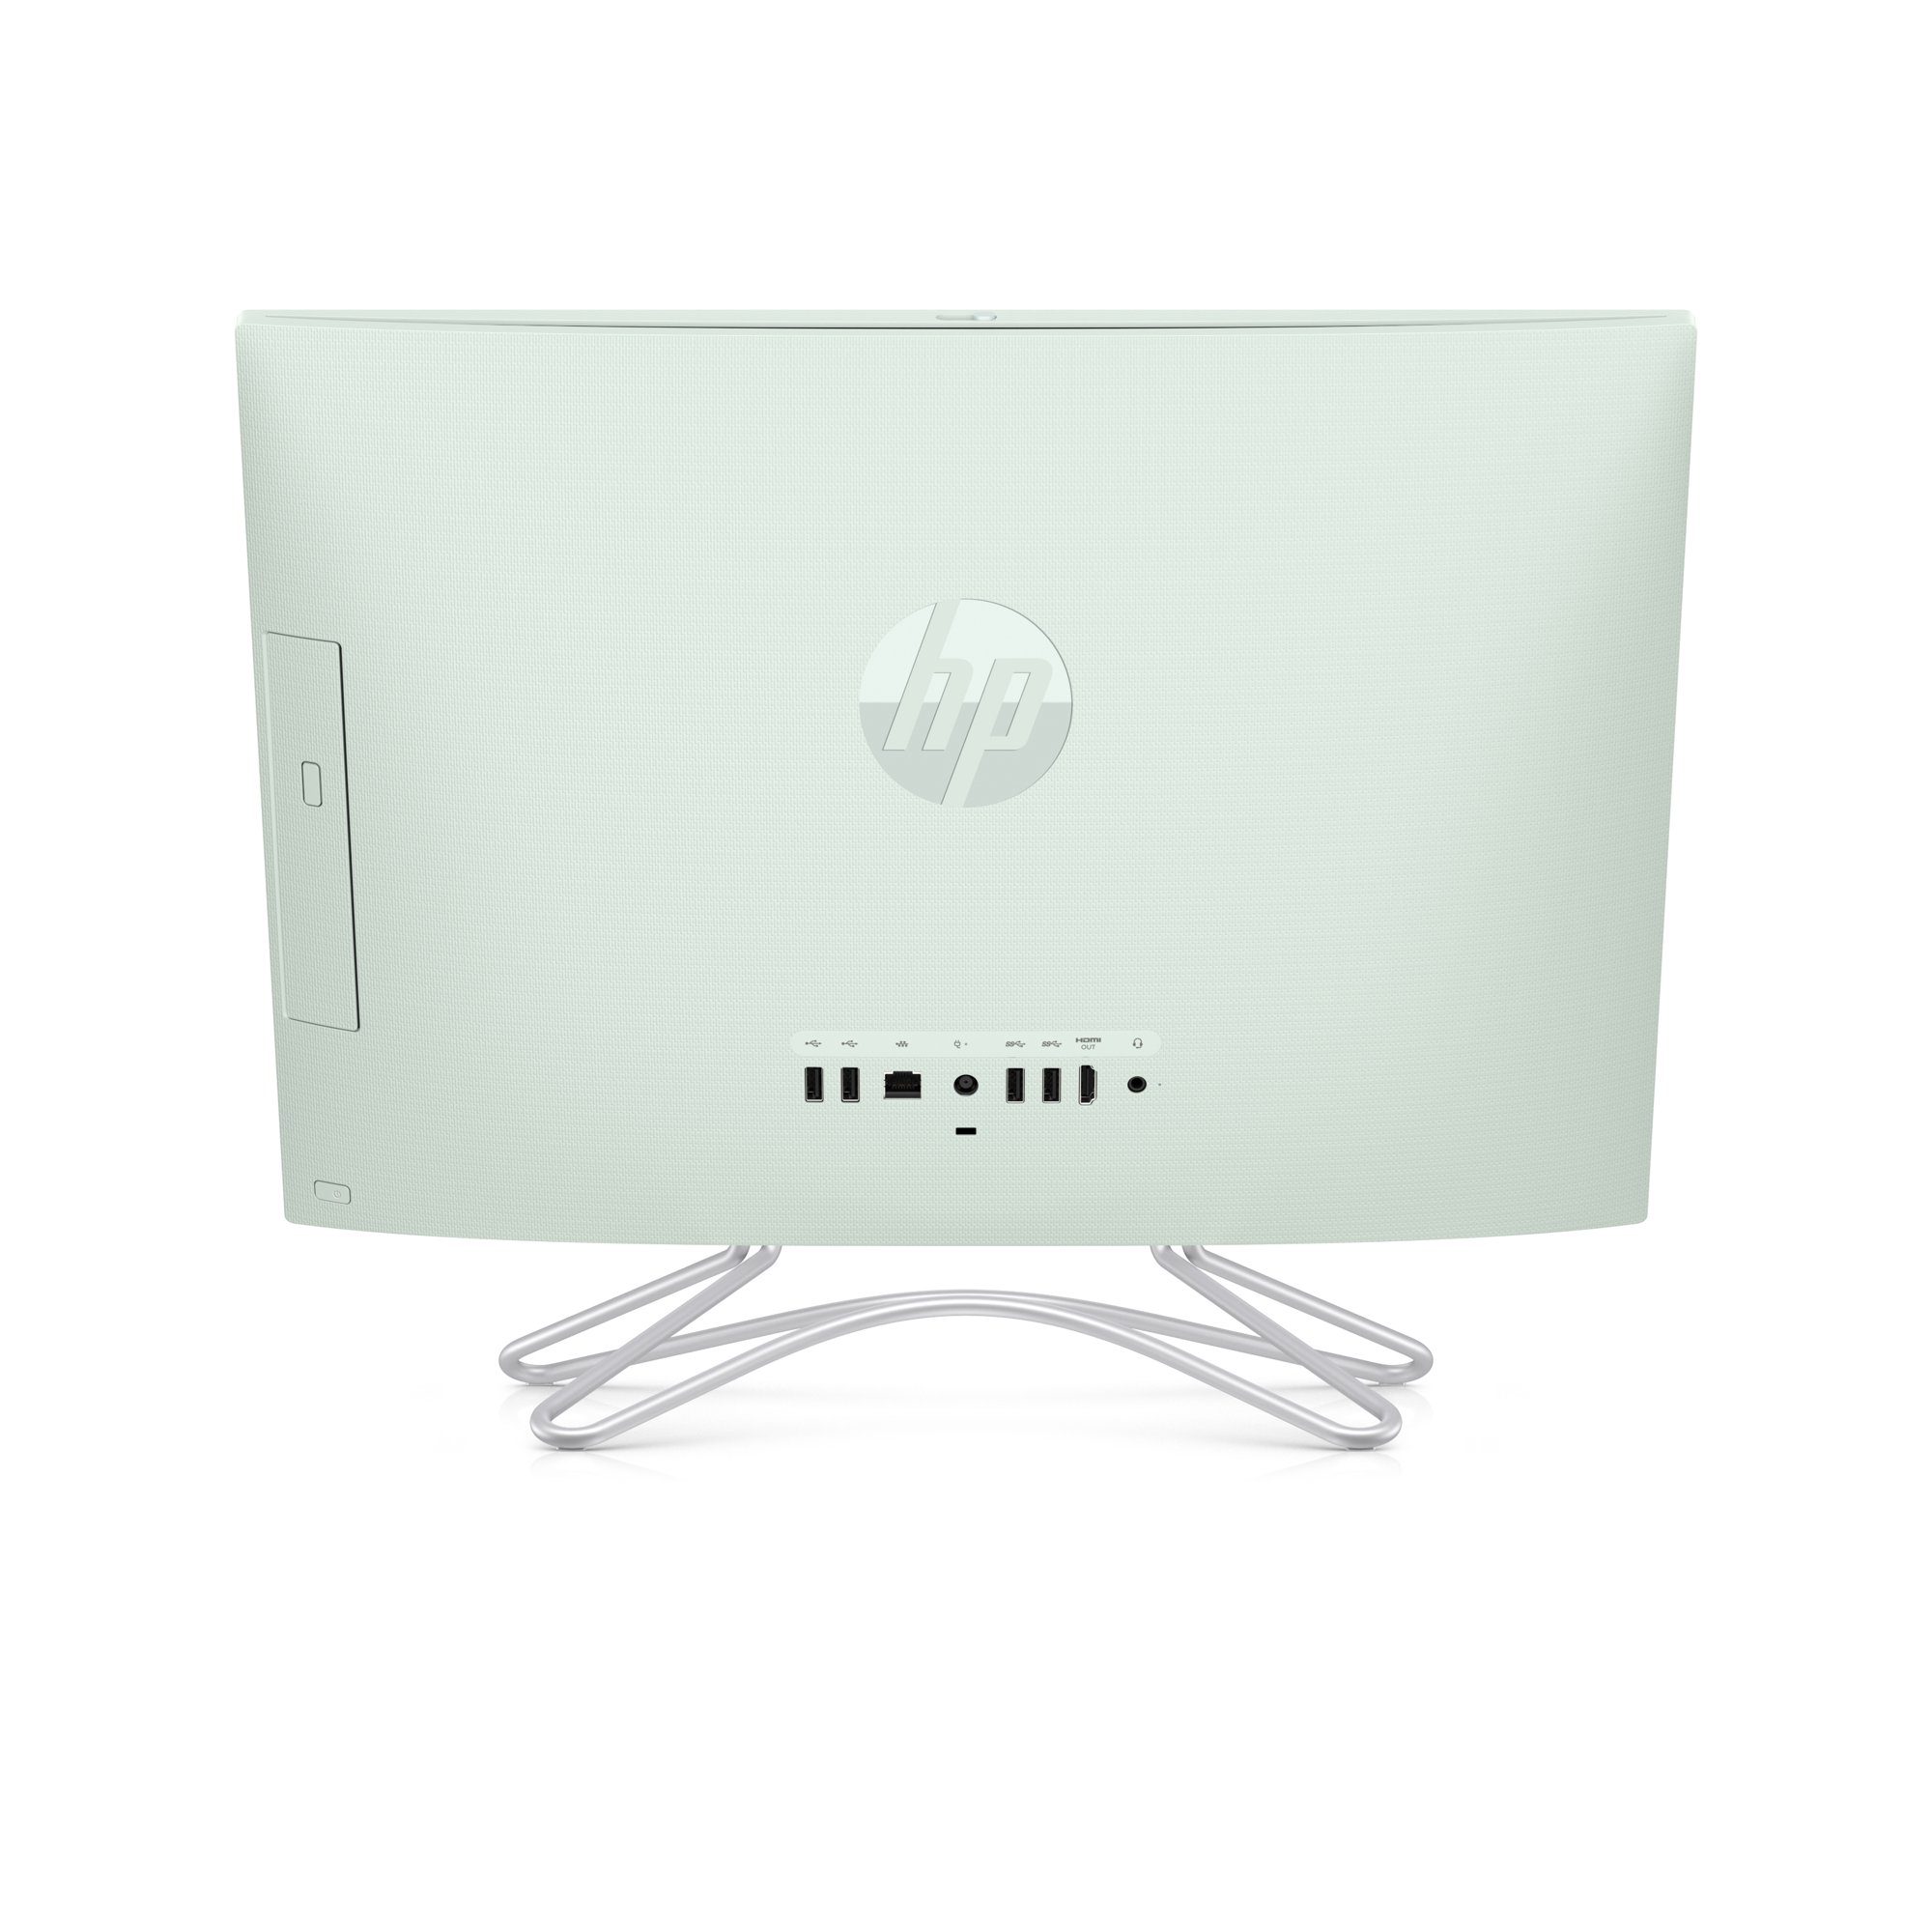 HP 22-c0073w All-in-One, 22" Display, Intel Celeron G4900T 2.9 GHz, 4GB RAM, 1TB HDD, Mint Color - image 5 of 5